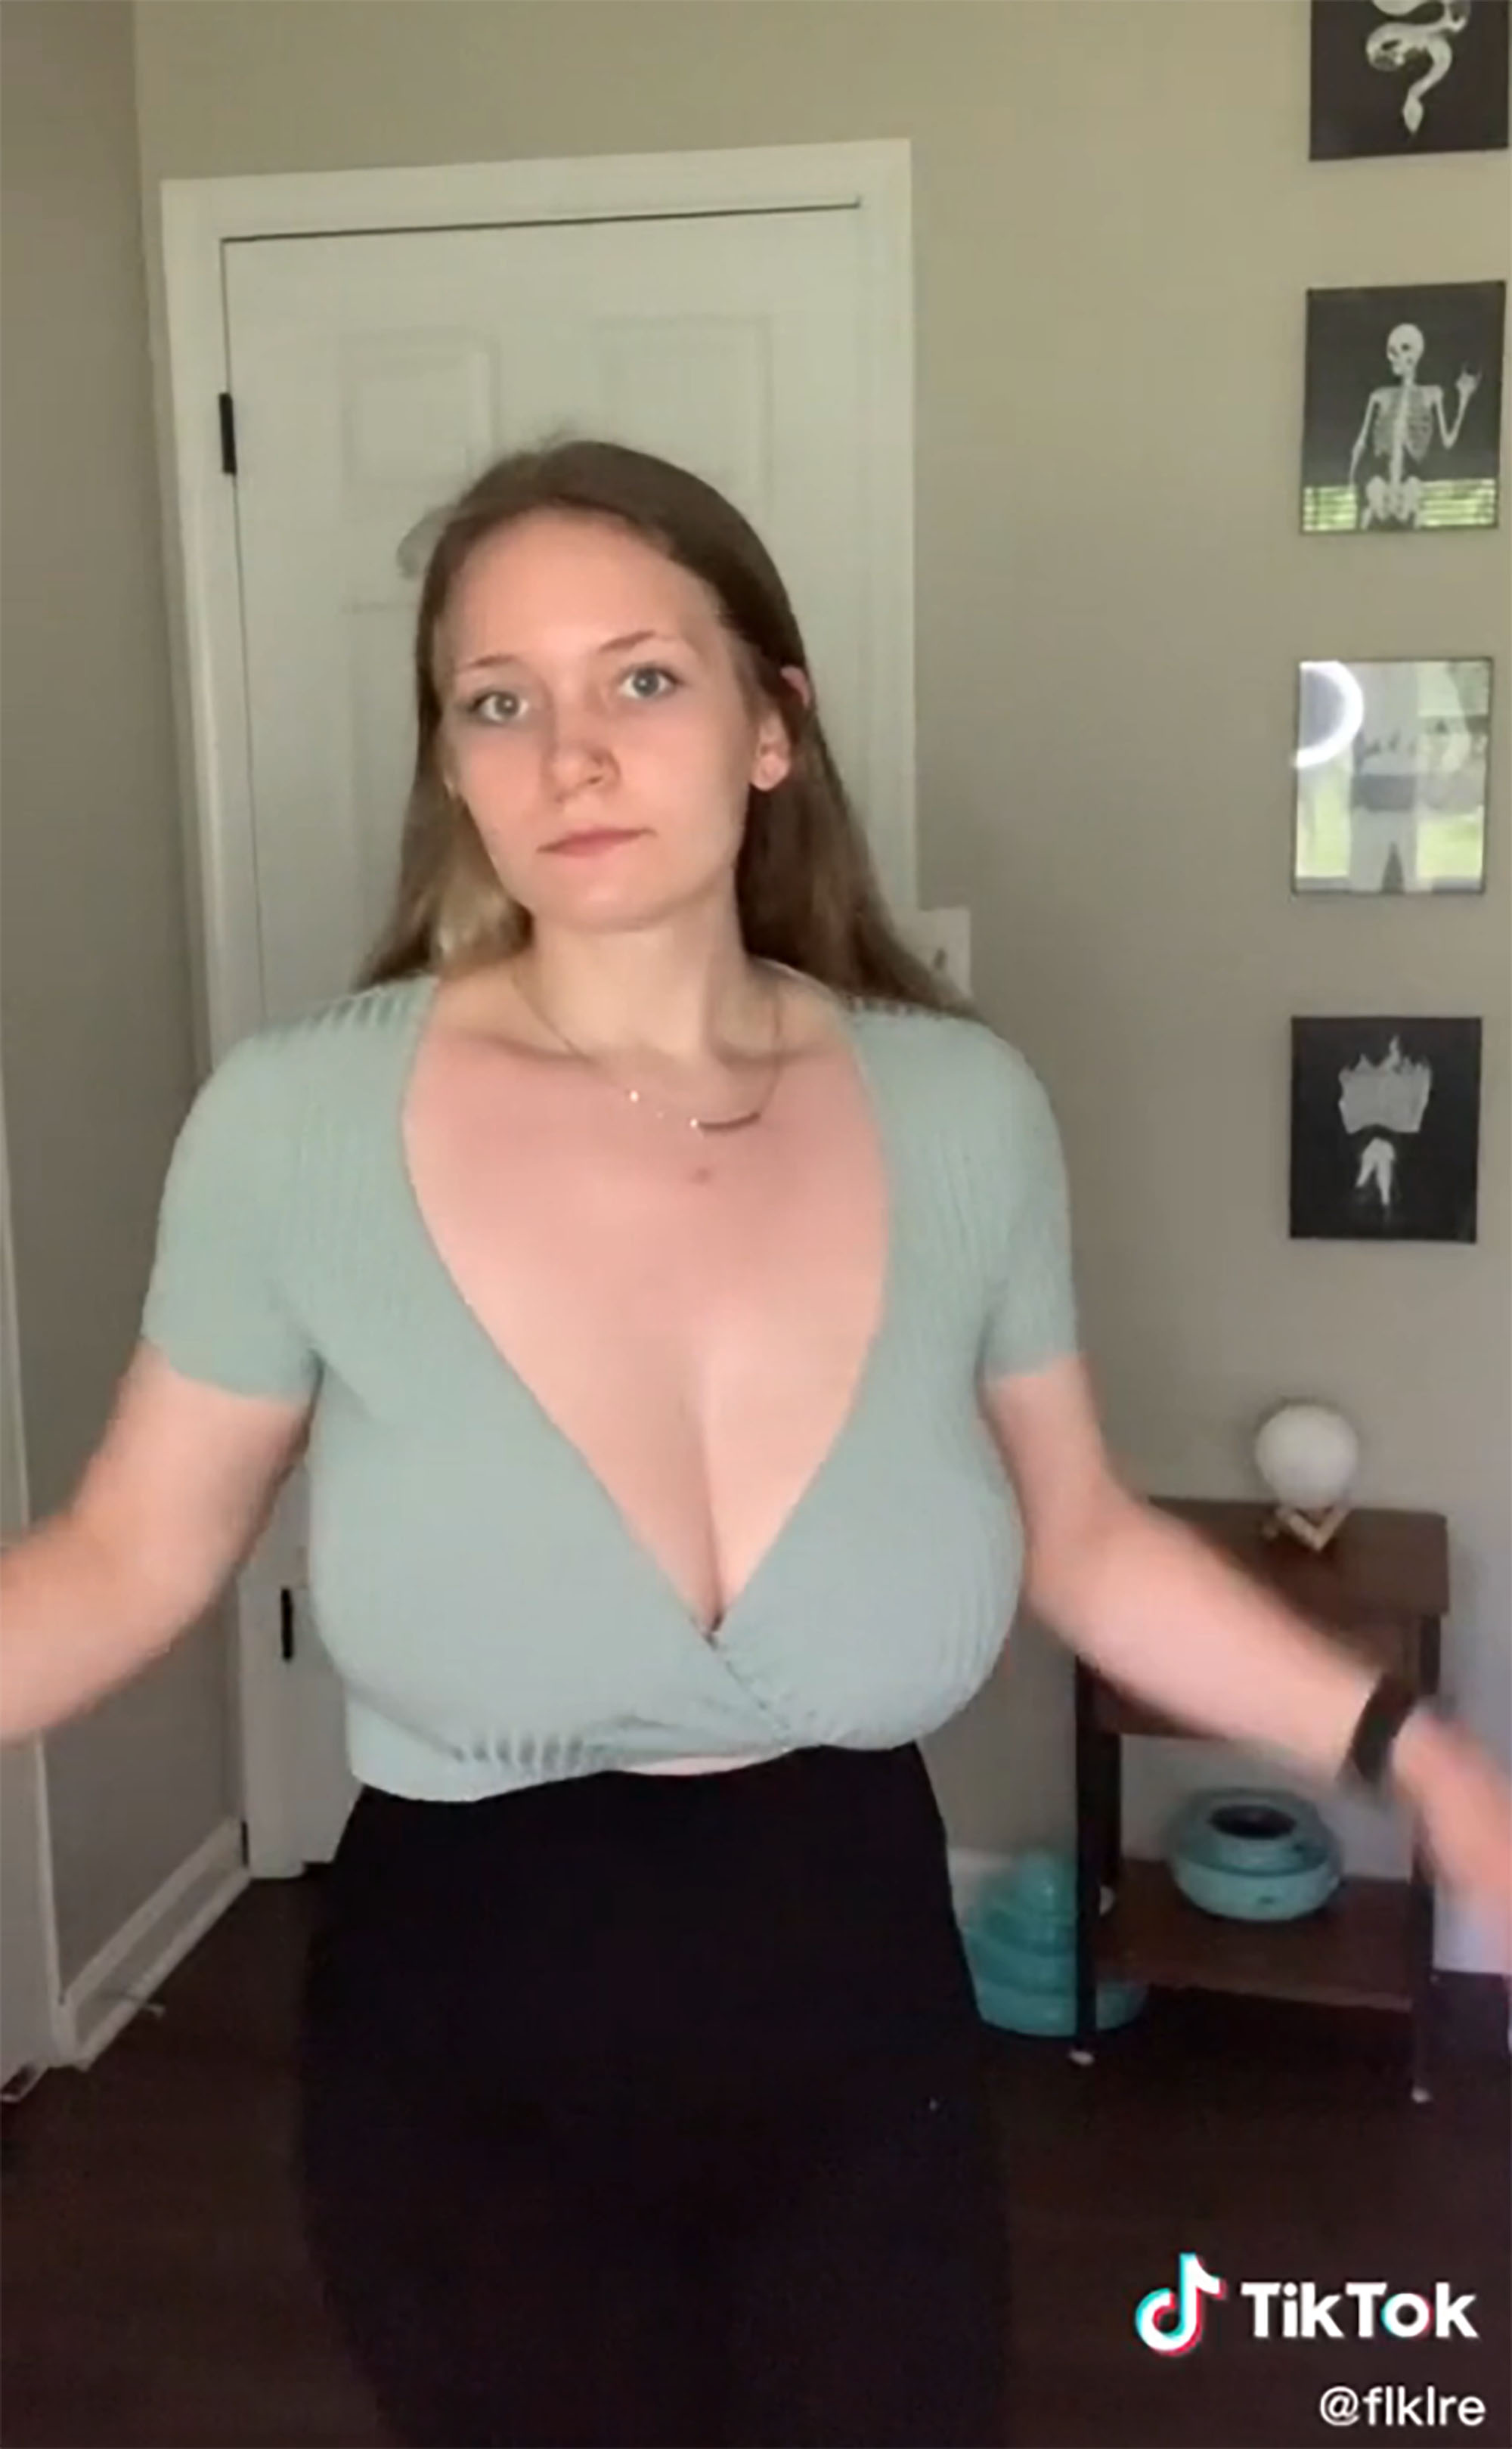 ashley duckett recommends boobs coming out of shirt pic